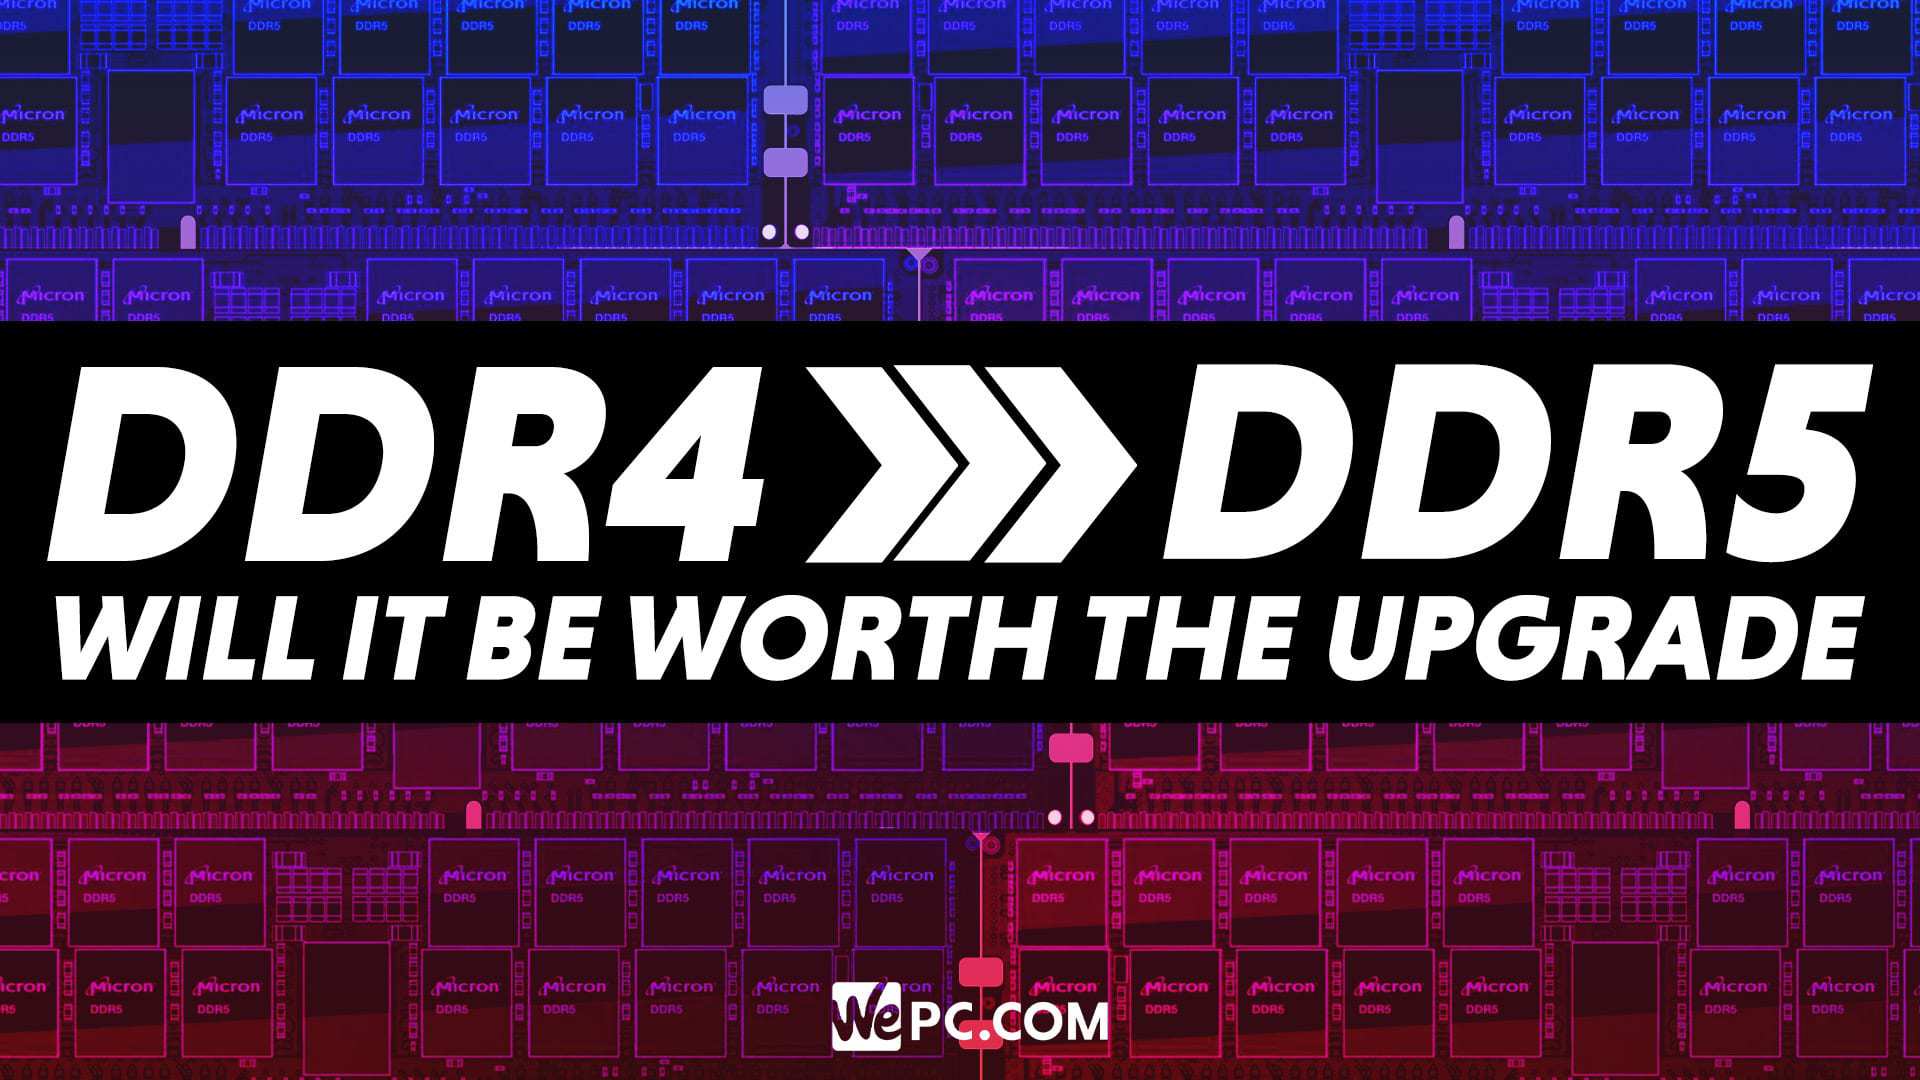 DDR4 vs DDR5 – will it be worth the upgrade?